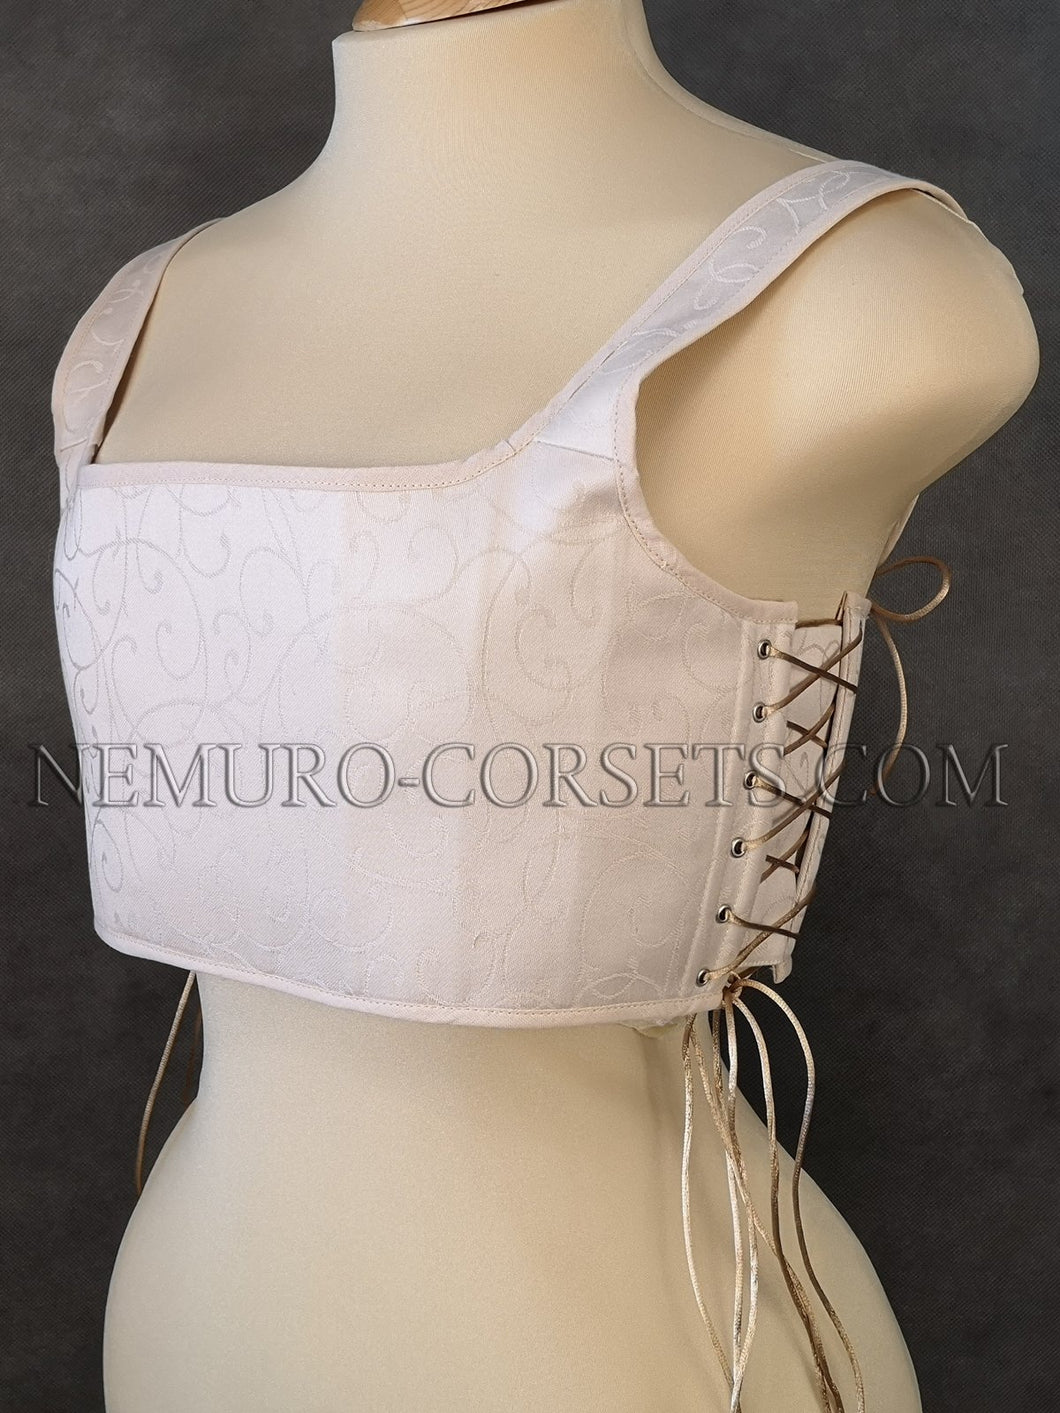 breast binder products for sale